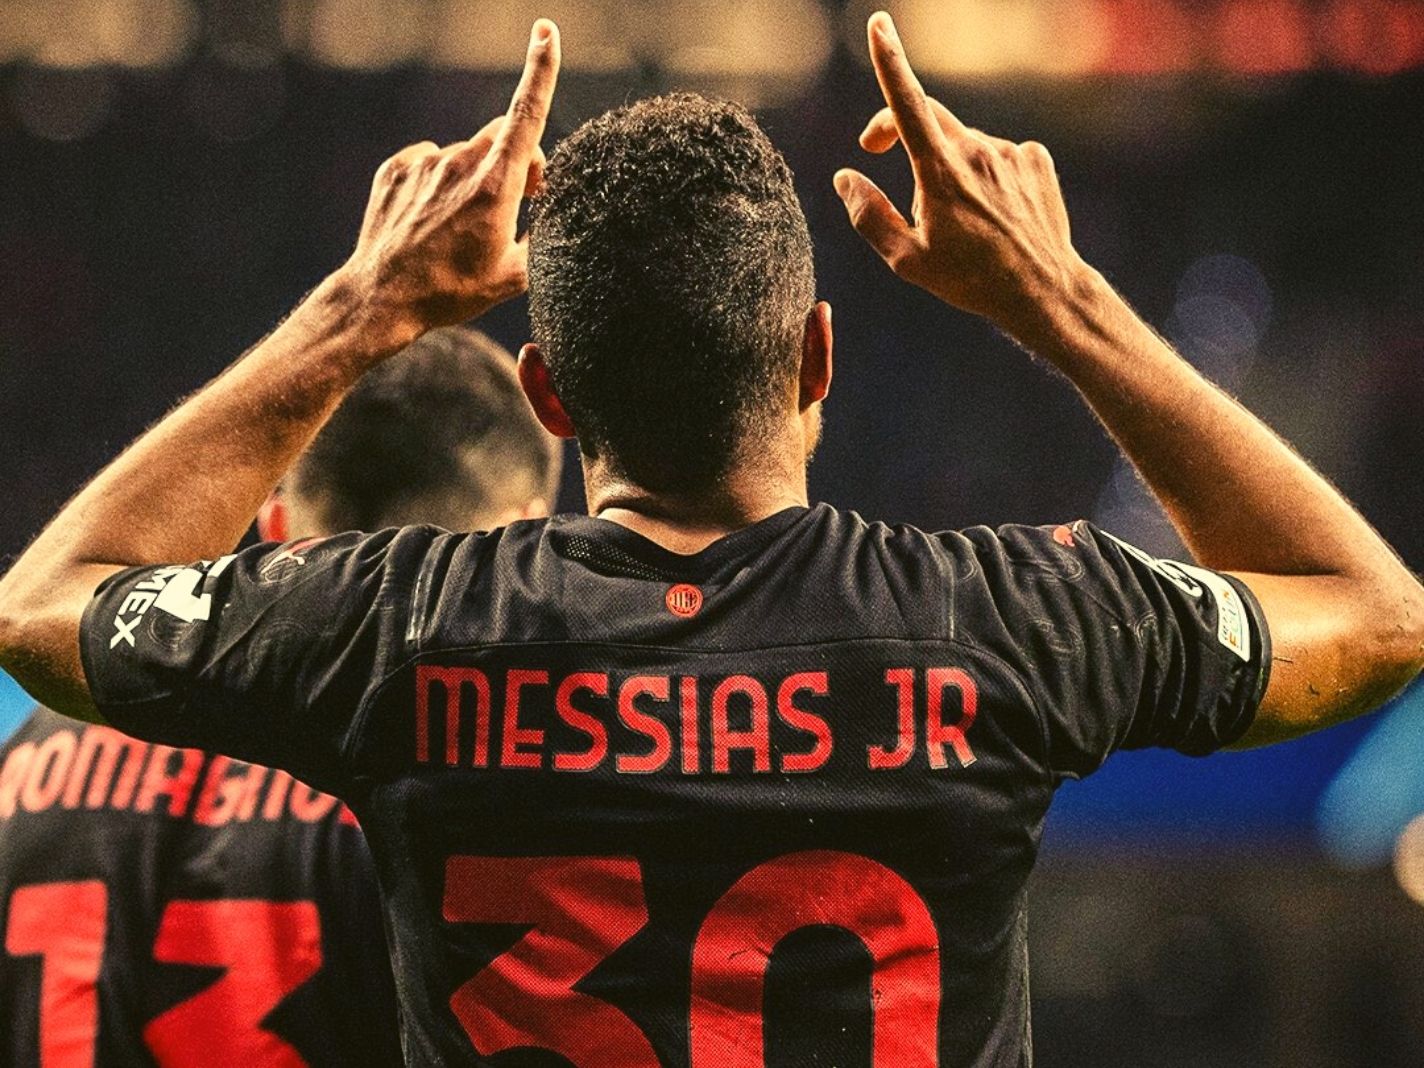 Introducing Junior Messias, the AC Milan saviour who was once delivering fridges to make ends meet